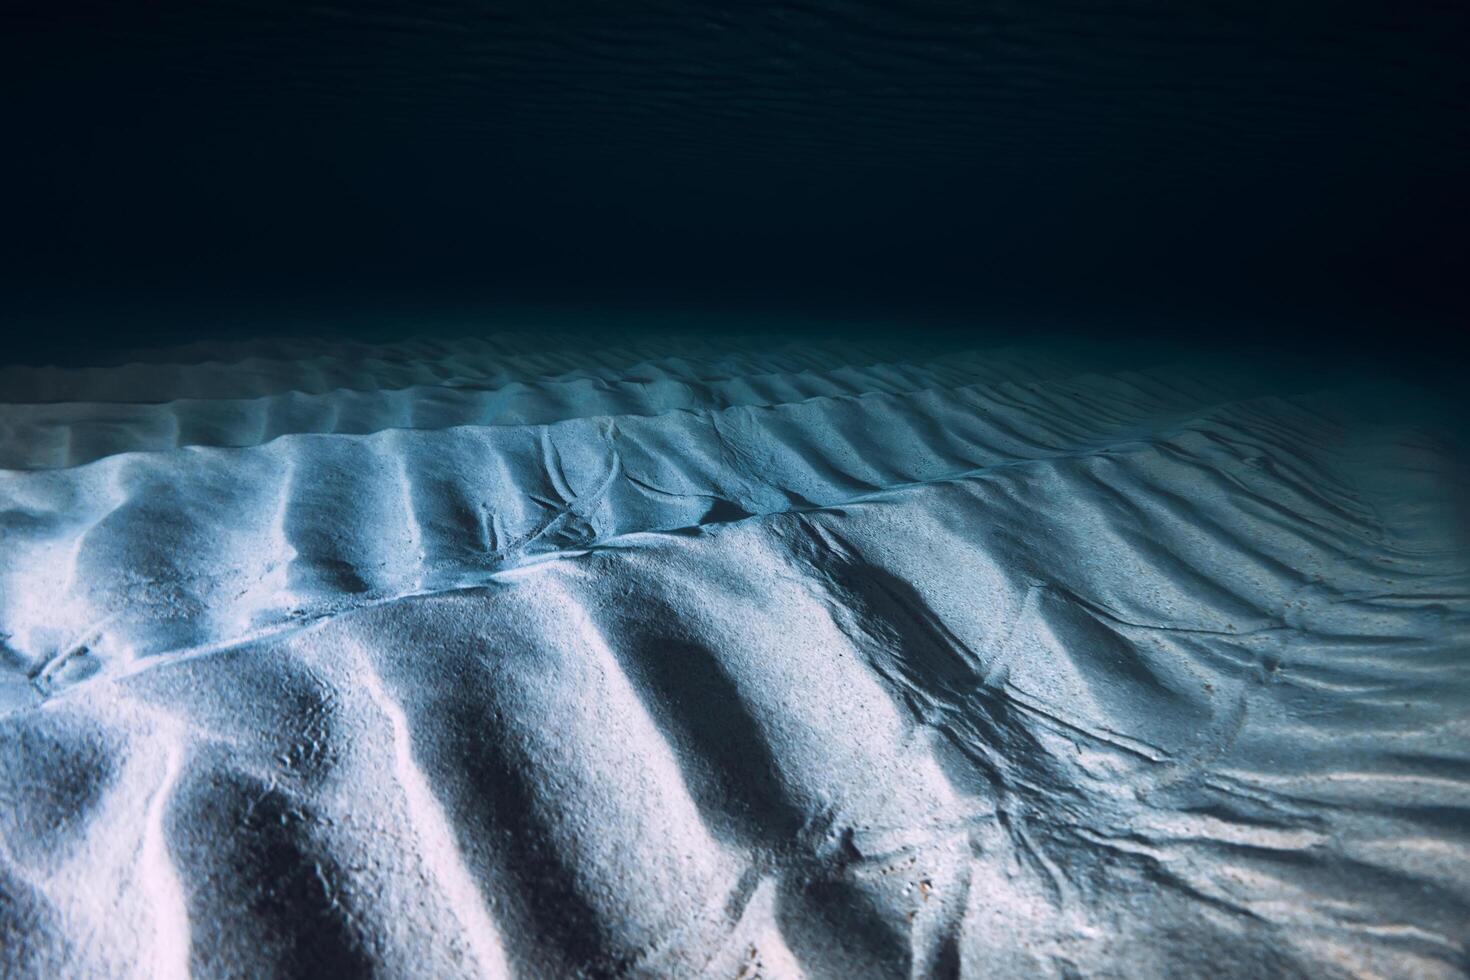 Tropical clear blue ocean  with sand bottom on night. Underwater view with artificial light photo